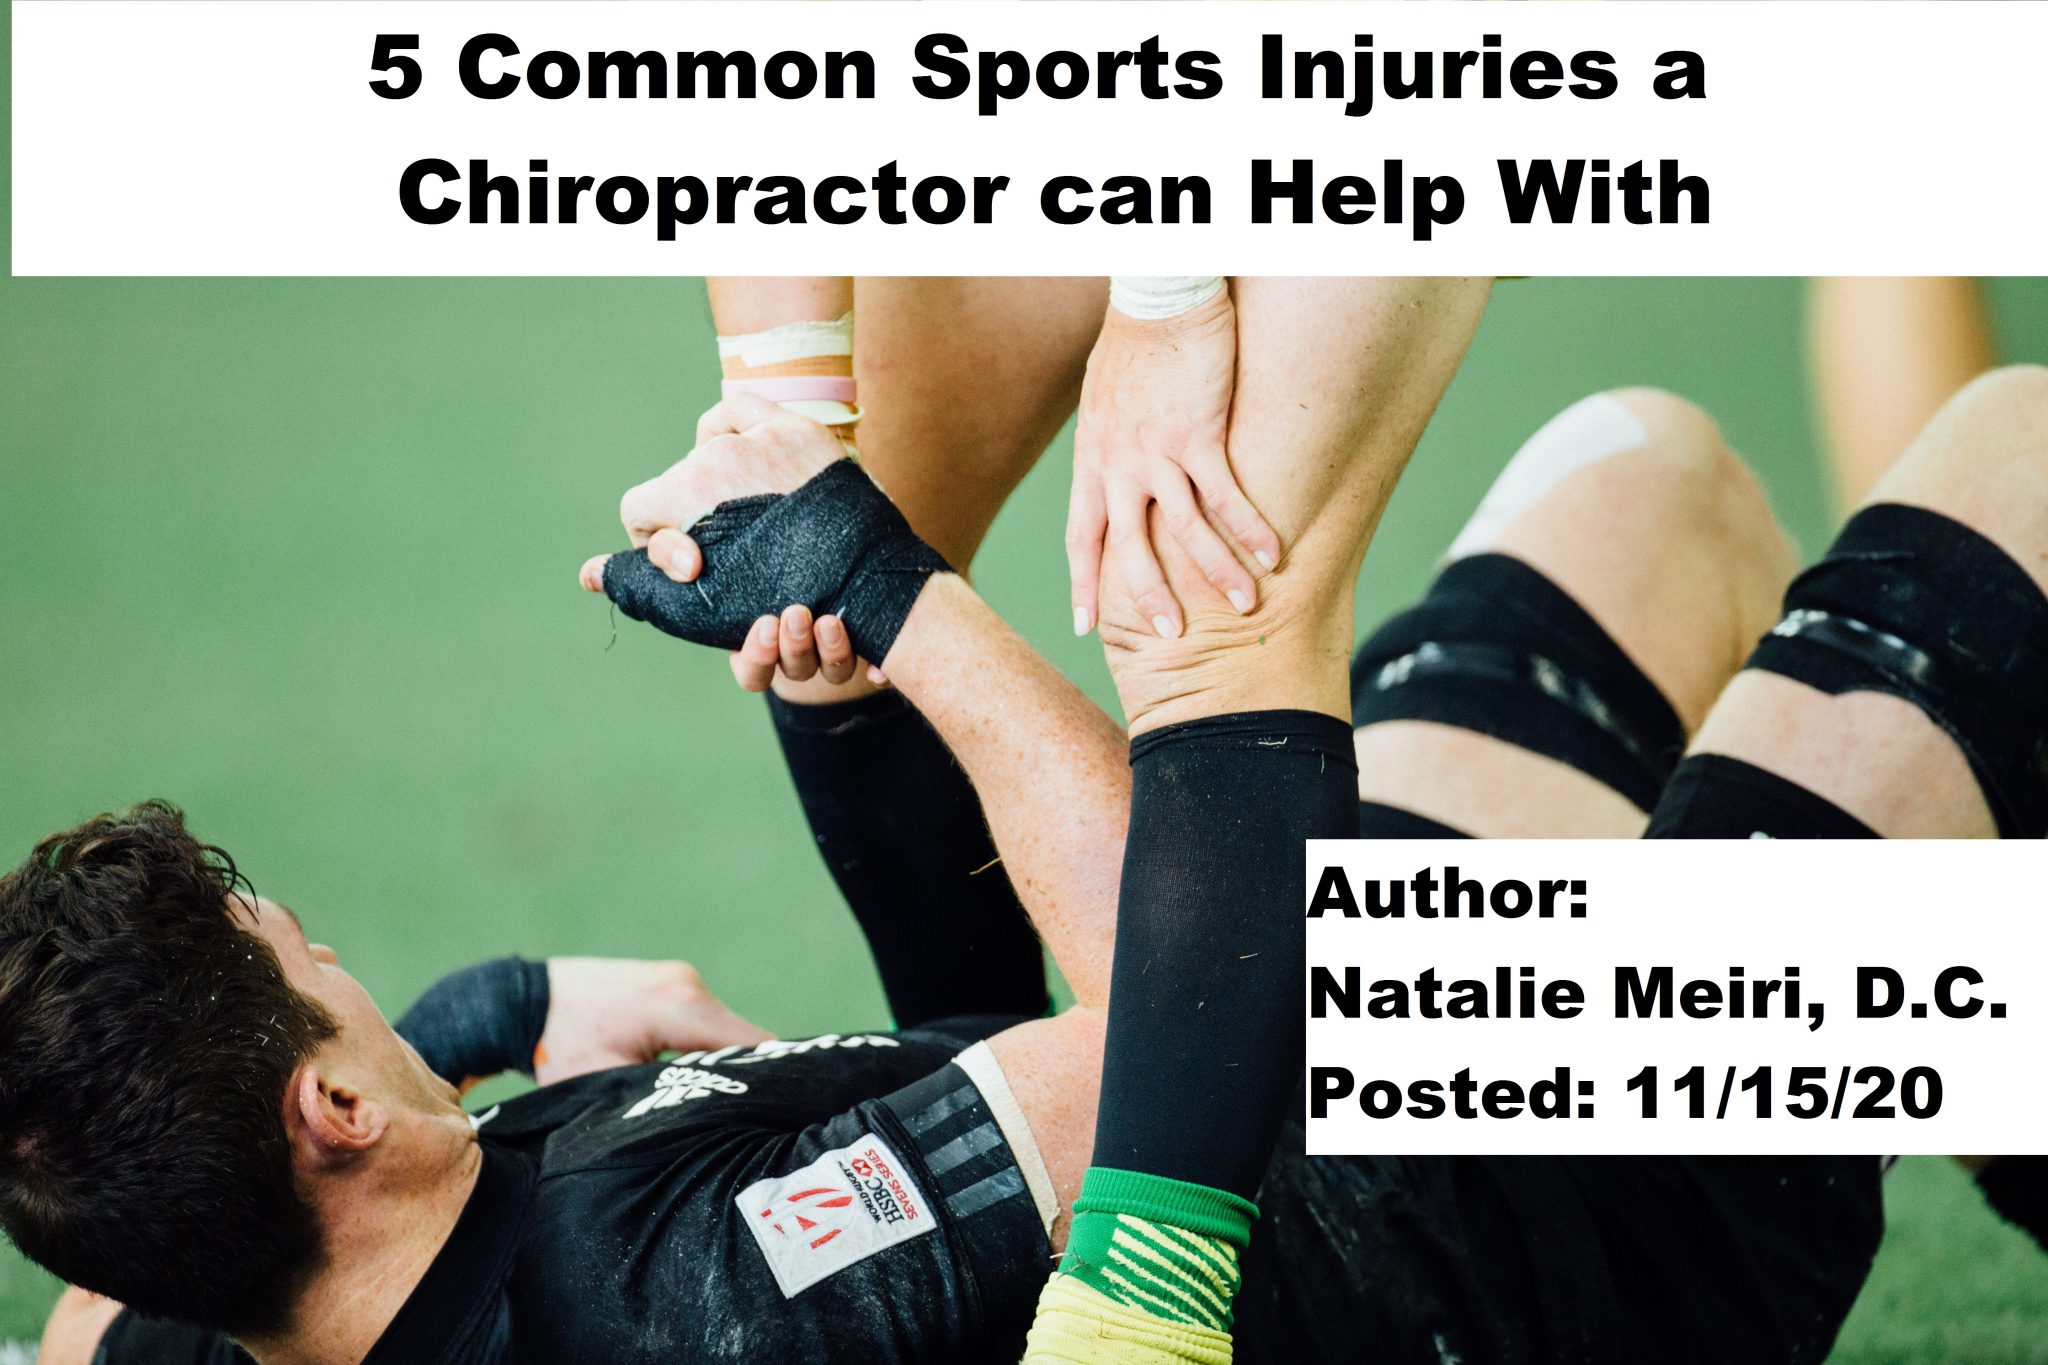 5 Common Sports Injuries a Chiropractor can Help With